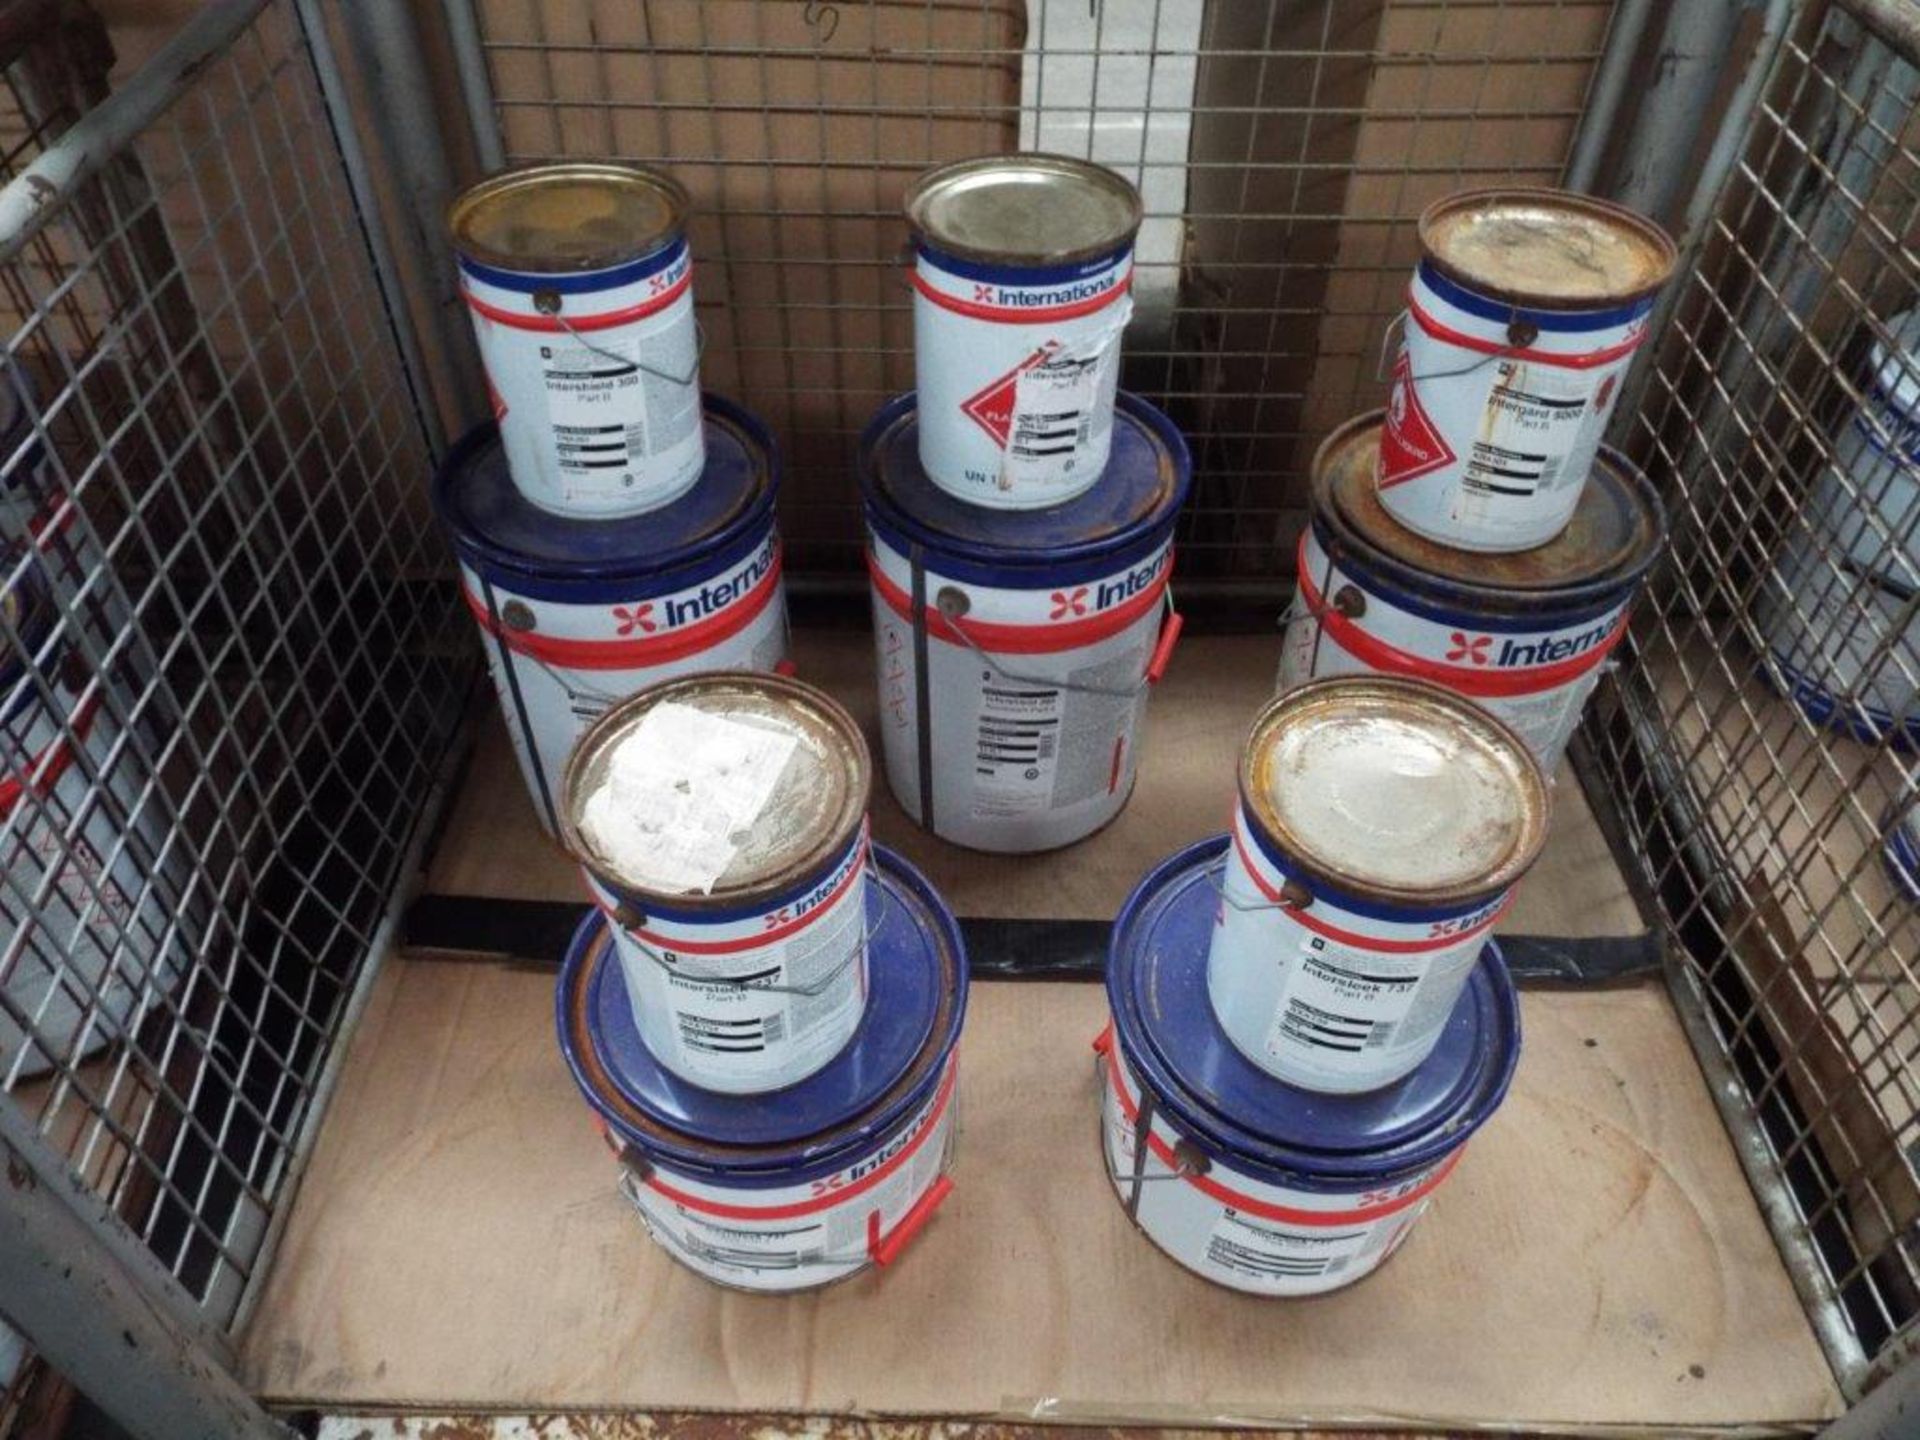 5 x Mixed Unissued Cans of Intershield/Intergard/Intersleek 2-Part Protective Coatings